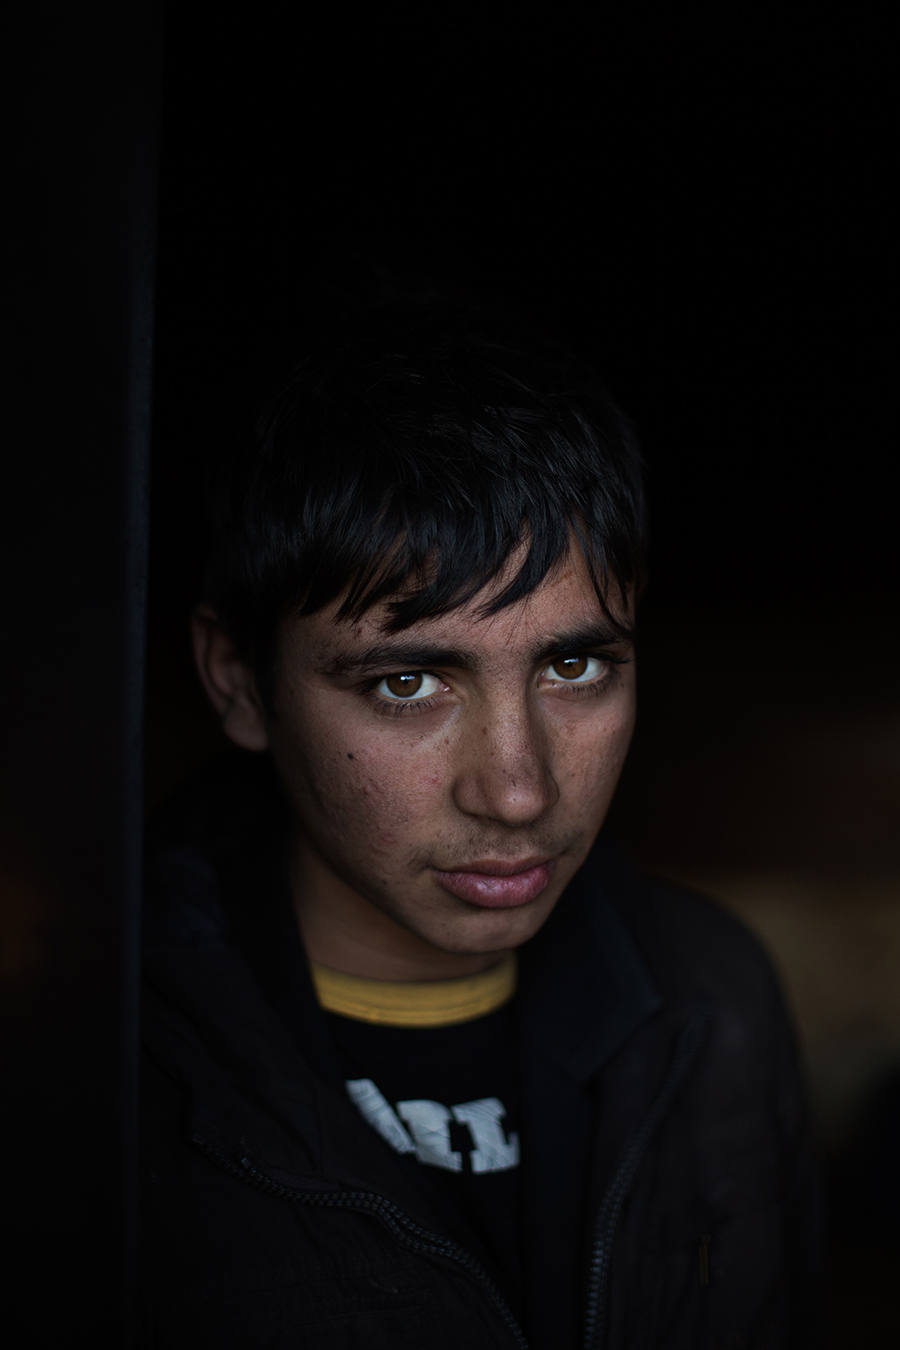  14 year-old Melet, an Afghan refugee sleeping rough in an abandoned warehouse behind Belgrade’s main train station. Belgrade, Serbia. January 2017. 